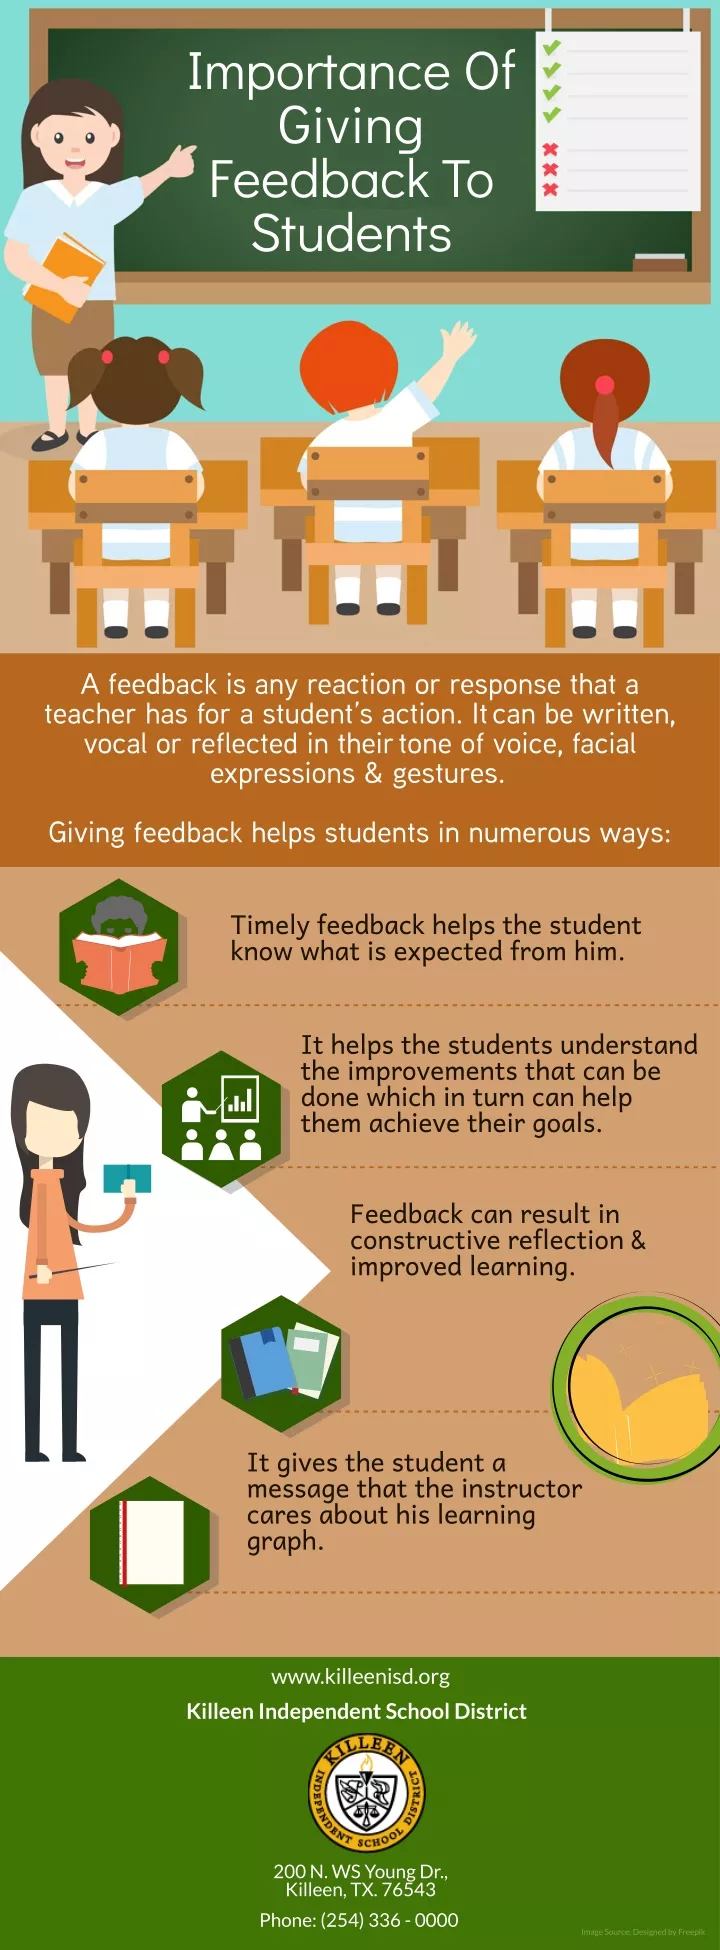 importance of giving feedback to students